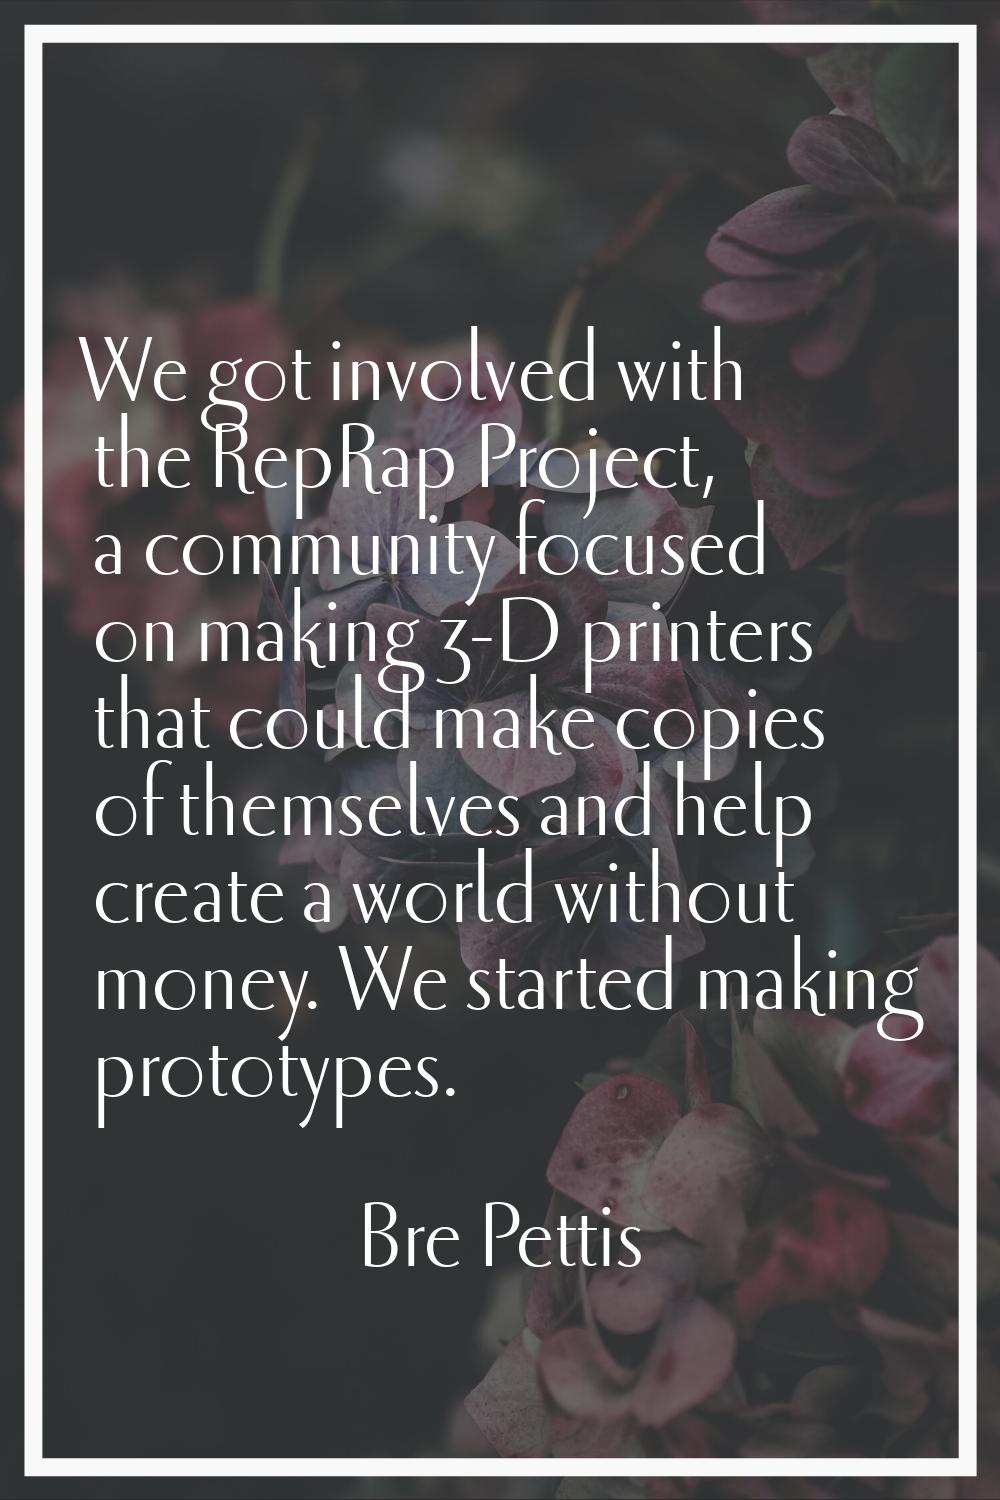 We got involved with the RepRap Project, a community focused on making 3-D printers that could make